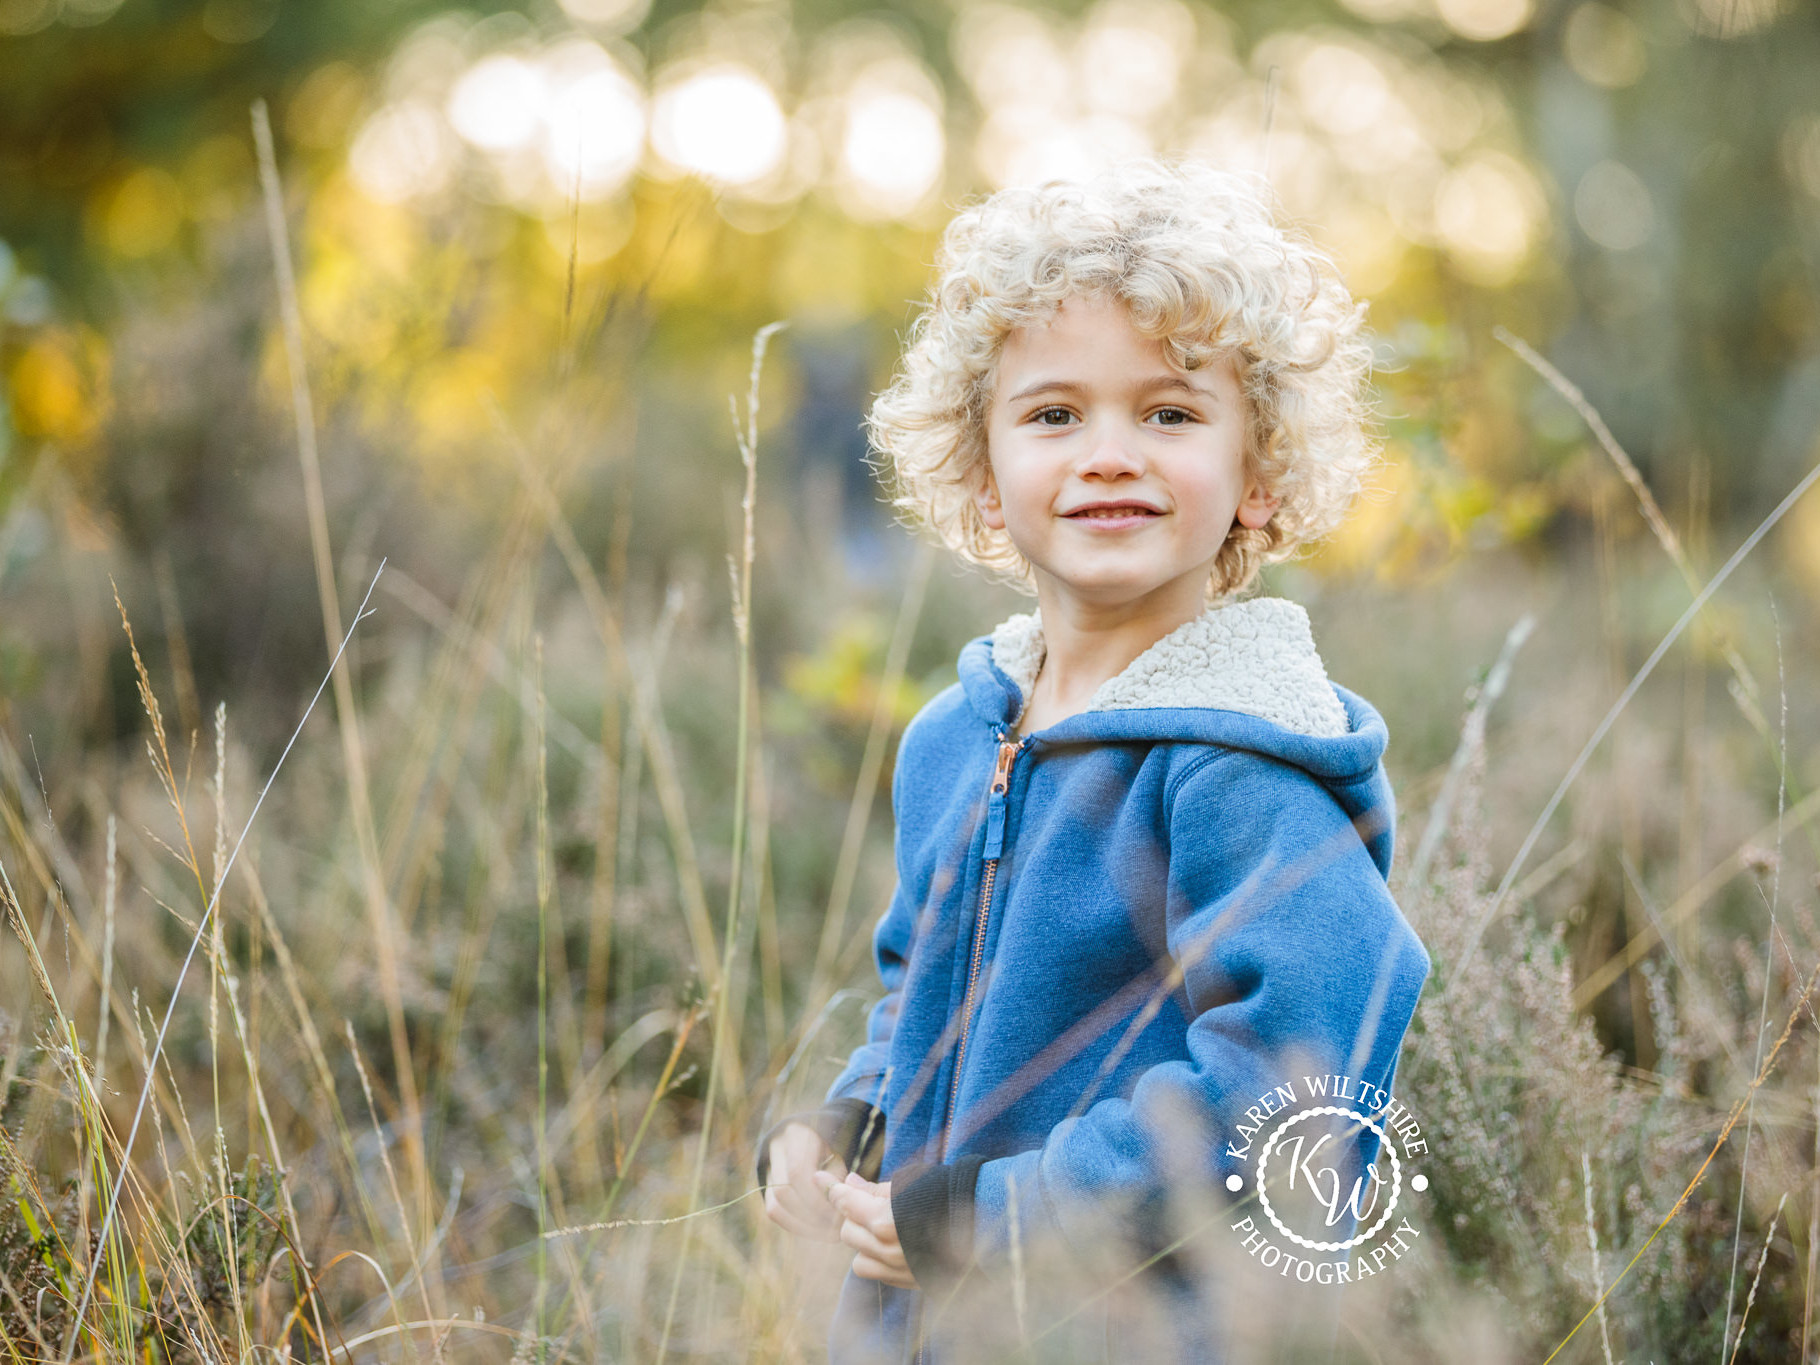 Young boy in long grass smiling for the camera